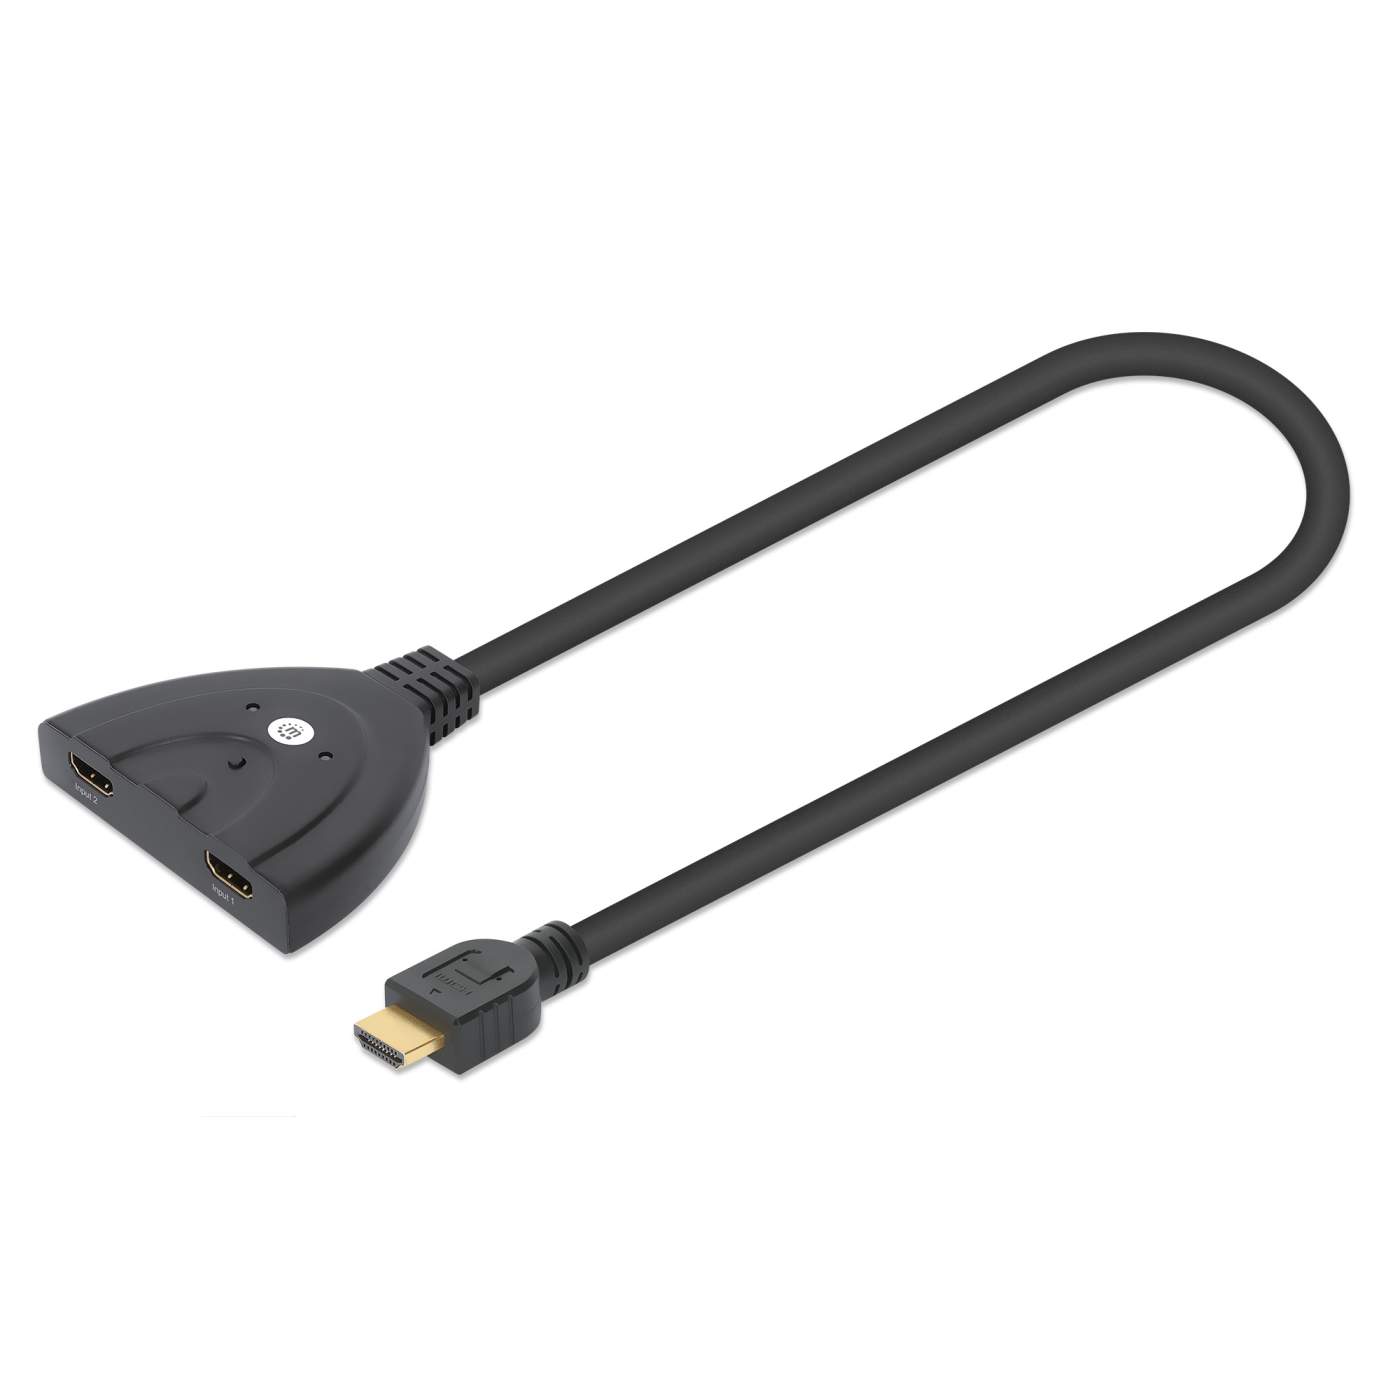 For Smart Device USB 2.0 To HDMI 50cm USB Power Cable to HDMI